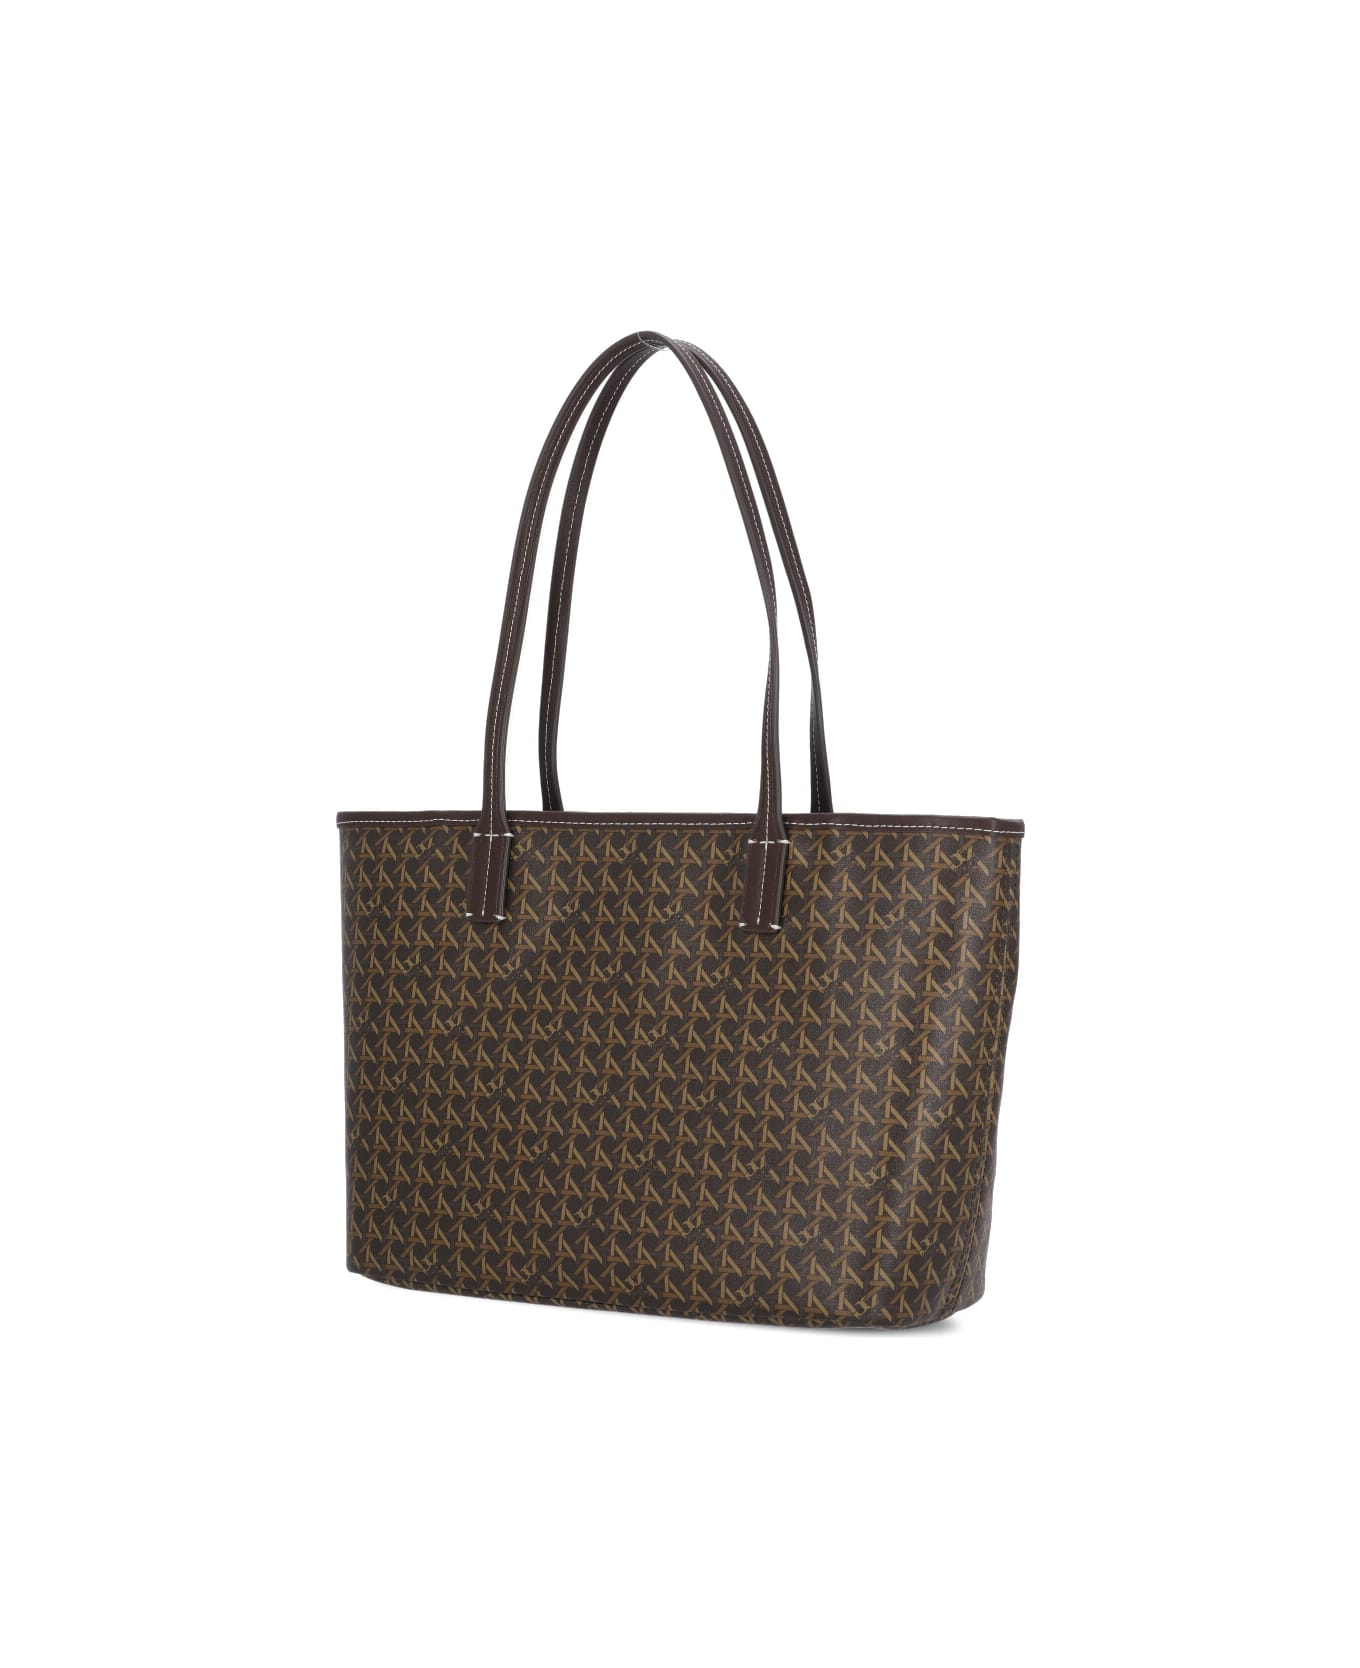 Tory Burch Ever-ready Tote Bag - Brown